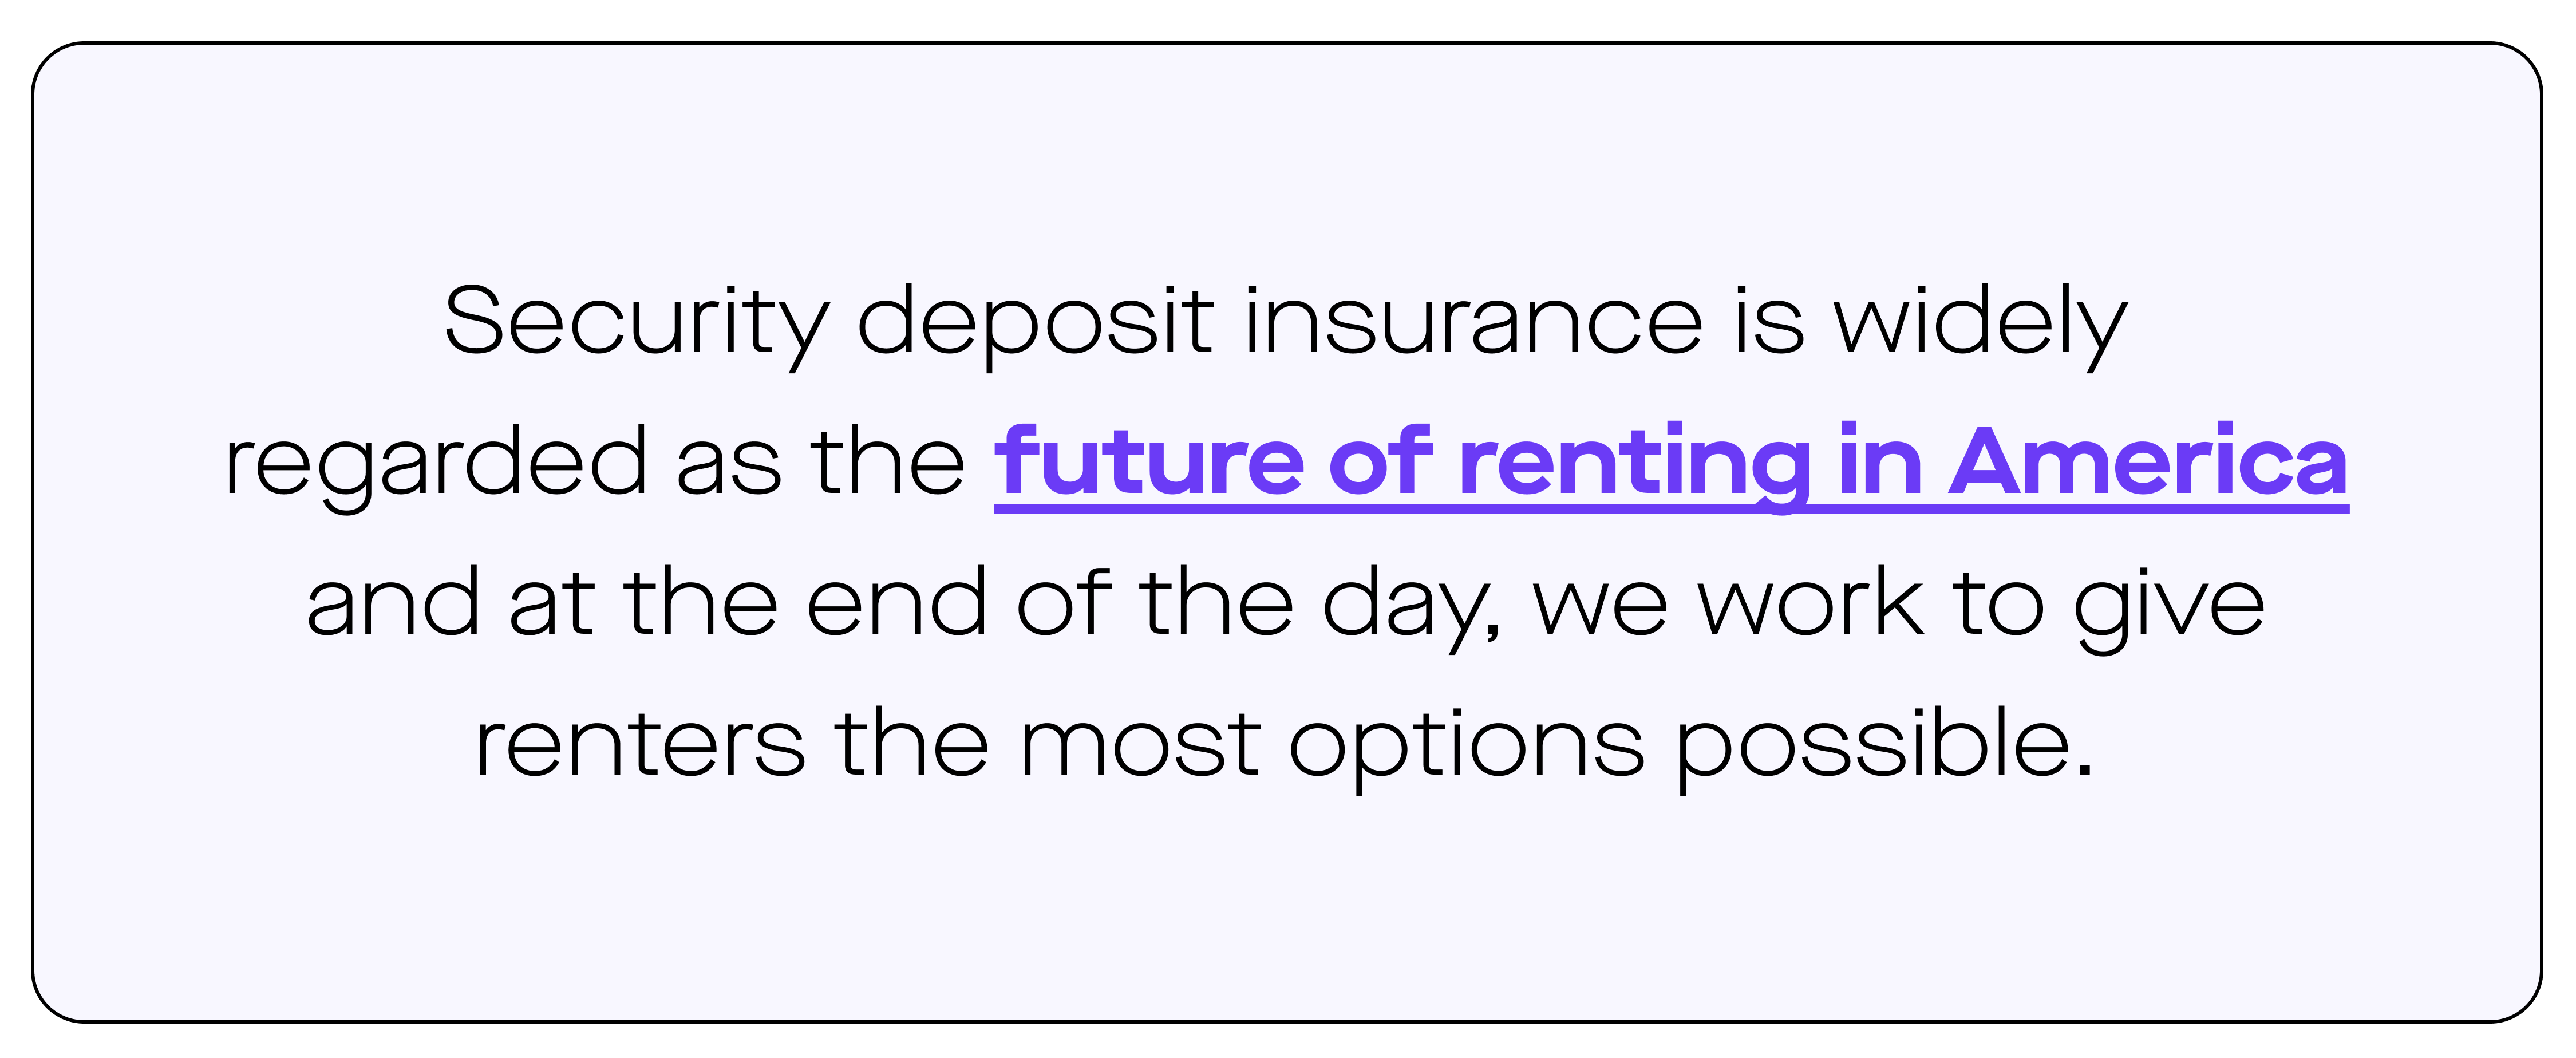 Quote graphic reading "Security deposit insurance is widely regarded as the future of renting in America and at the end of the day, we work to give renters the most options possible." 